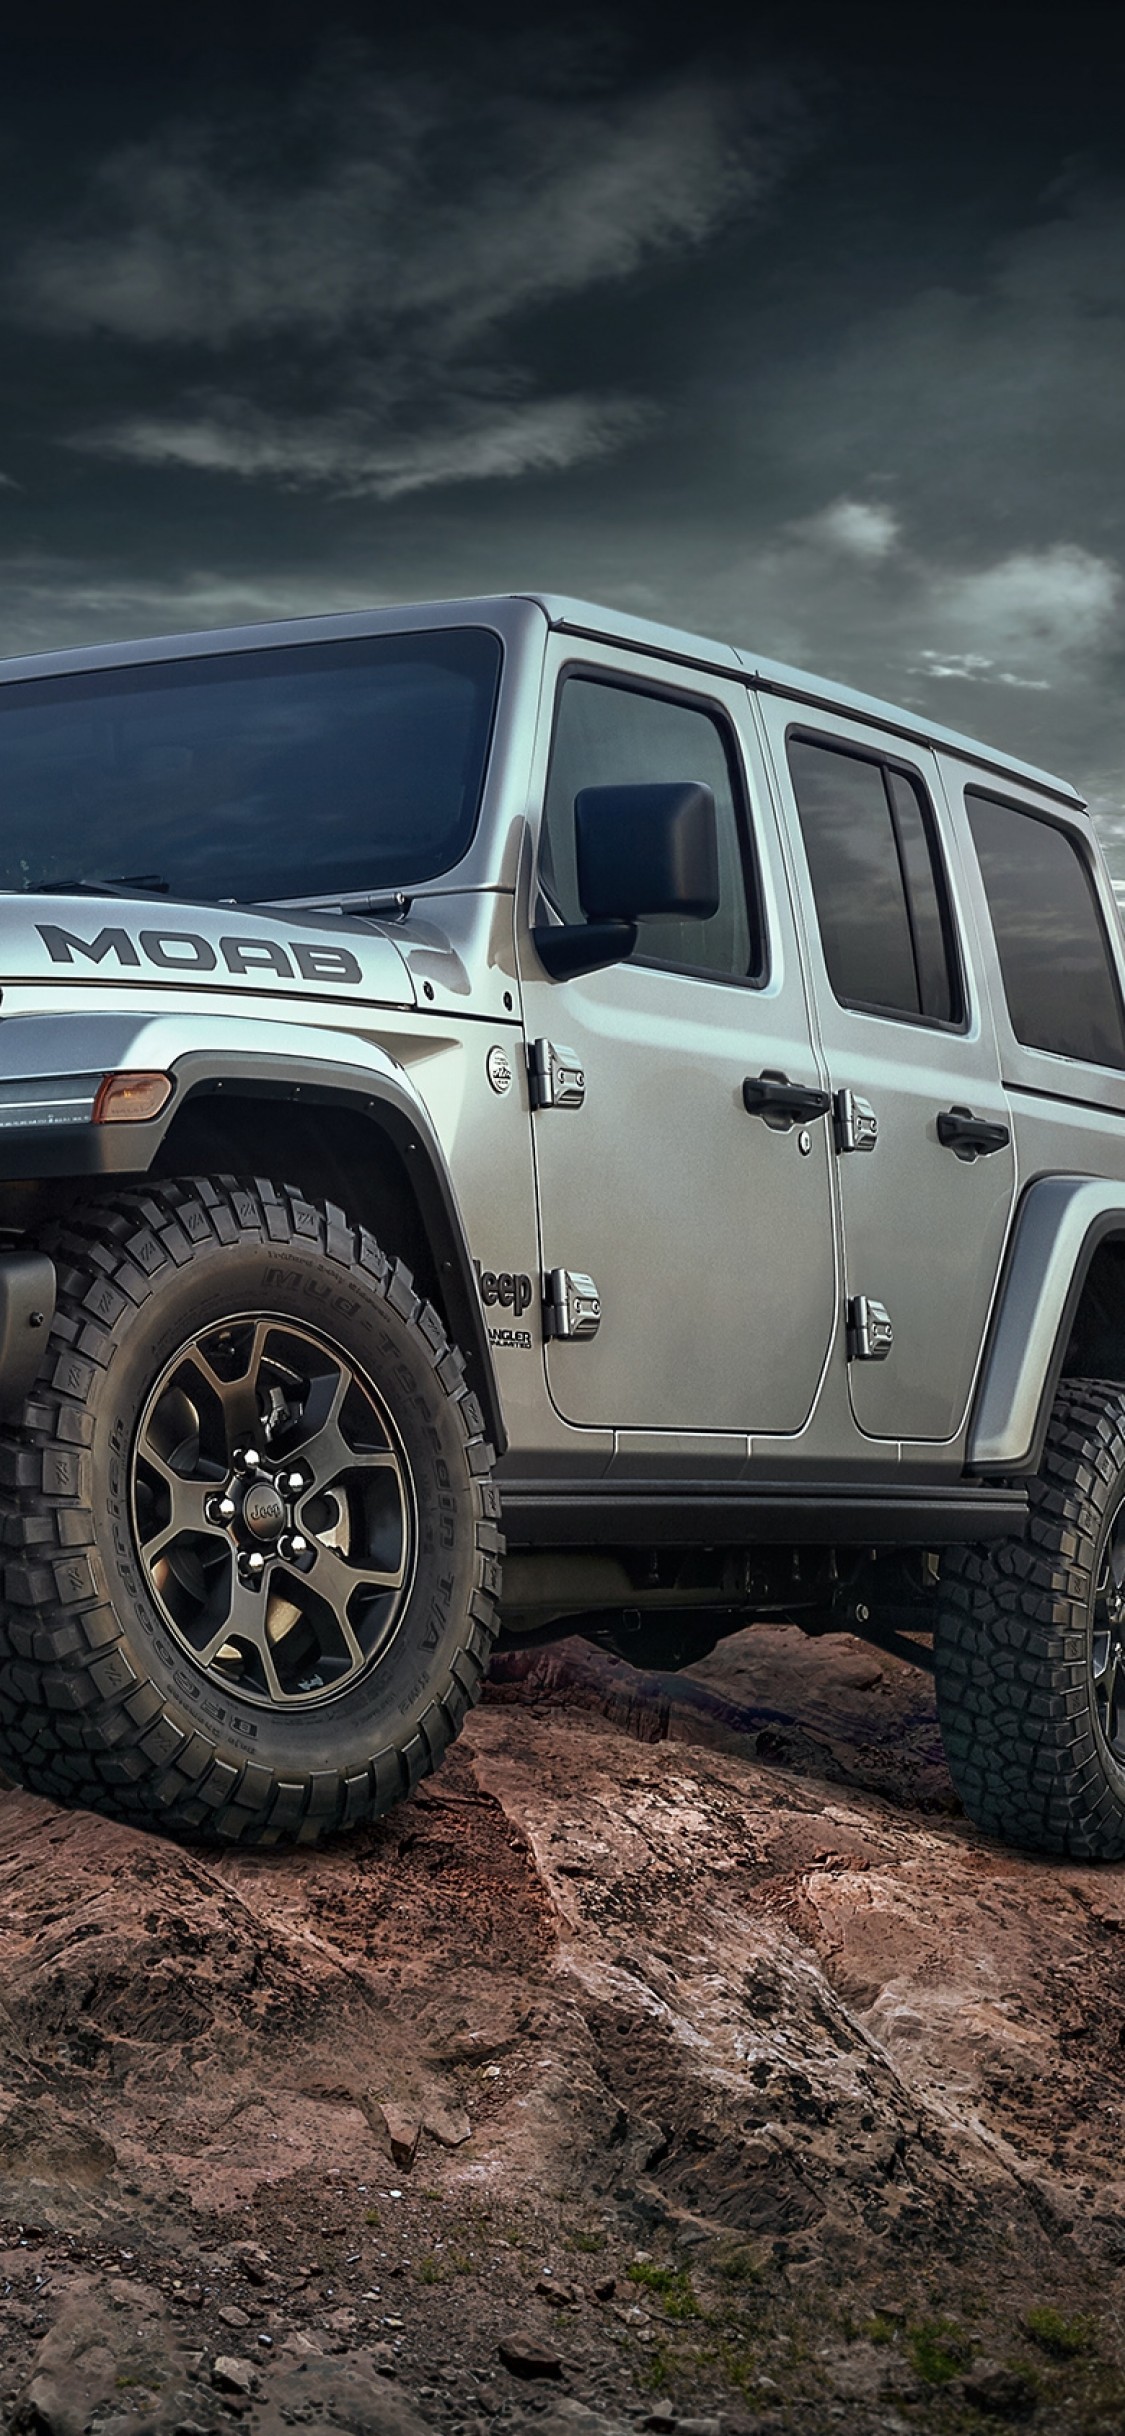 Jeep Wrangler Unlimited Moab Edition, Rocks, Mountain, - Jeep Wrangler Moab Edition - HD Wallpaper 